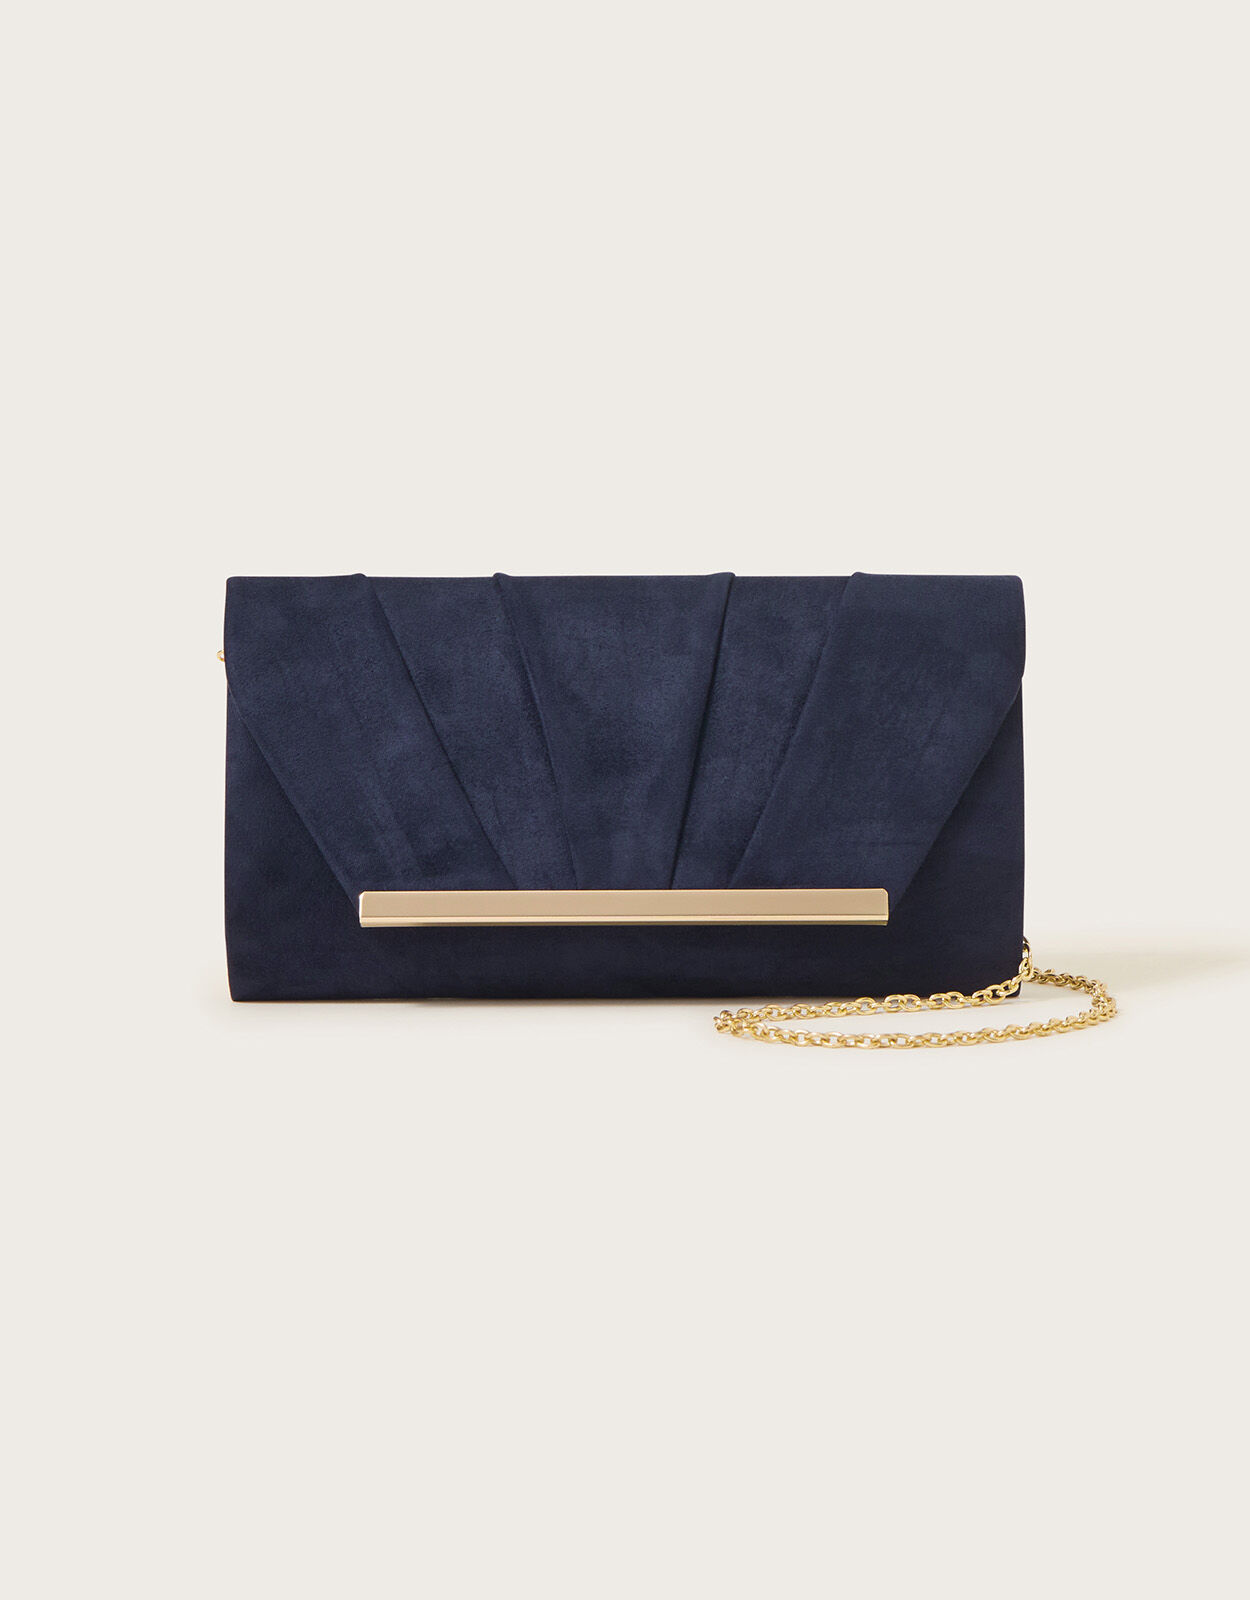 Bridal Clutch Bags for Every Budget: 23 Styles From High Street to Designer  - hitched.co.uk